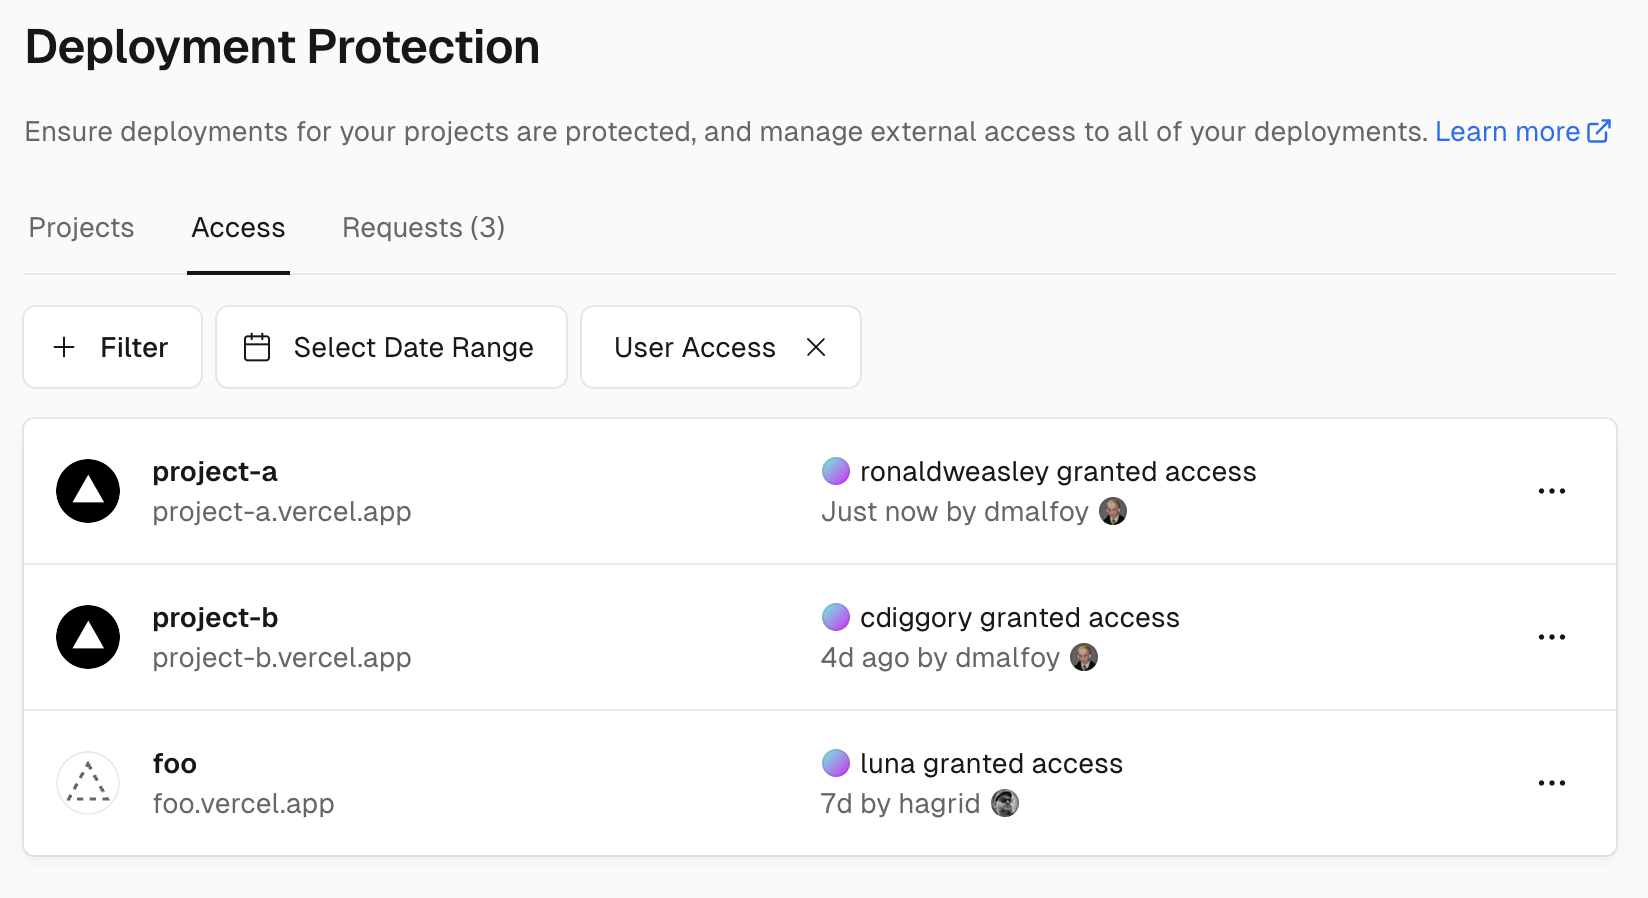 Granted access requests can be managed on the Dashboard > Settings > Deployment Protection > Access section.